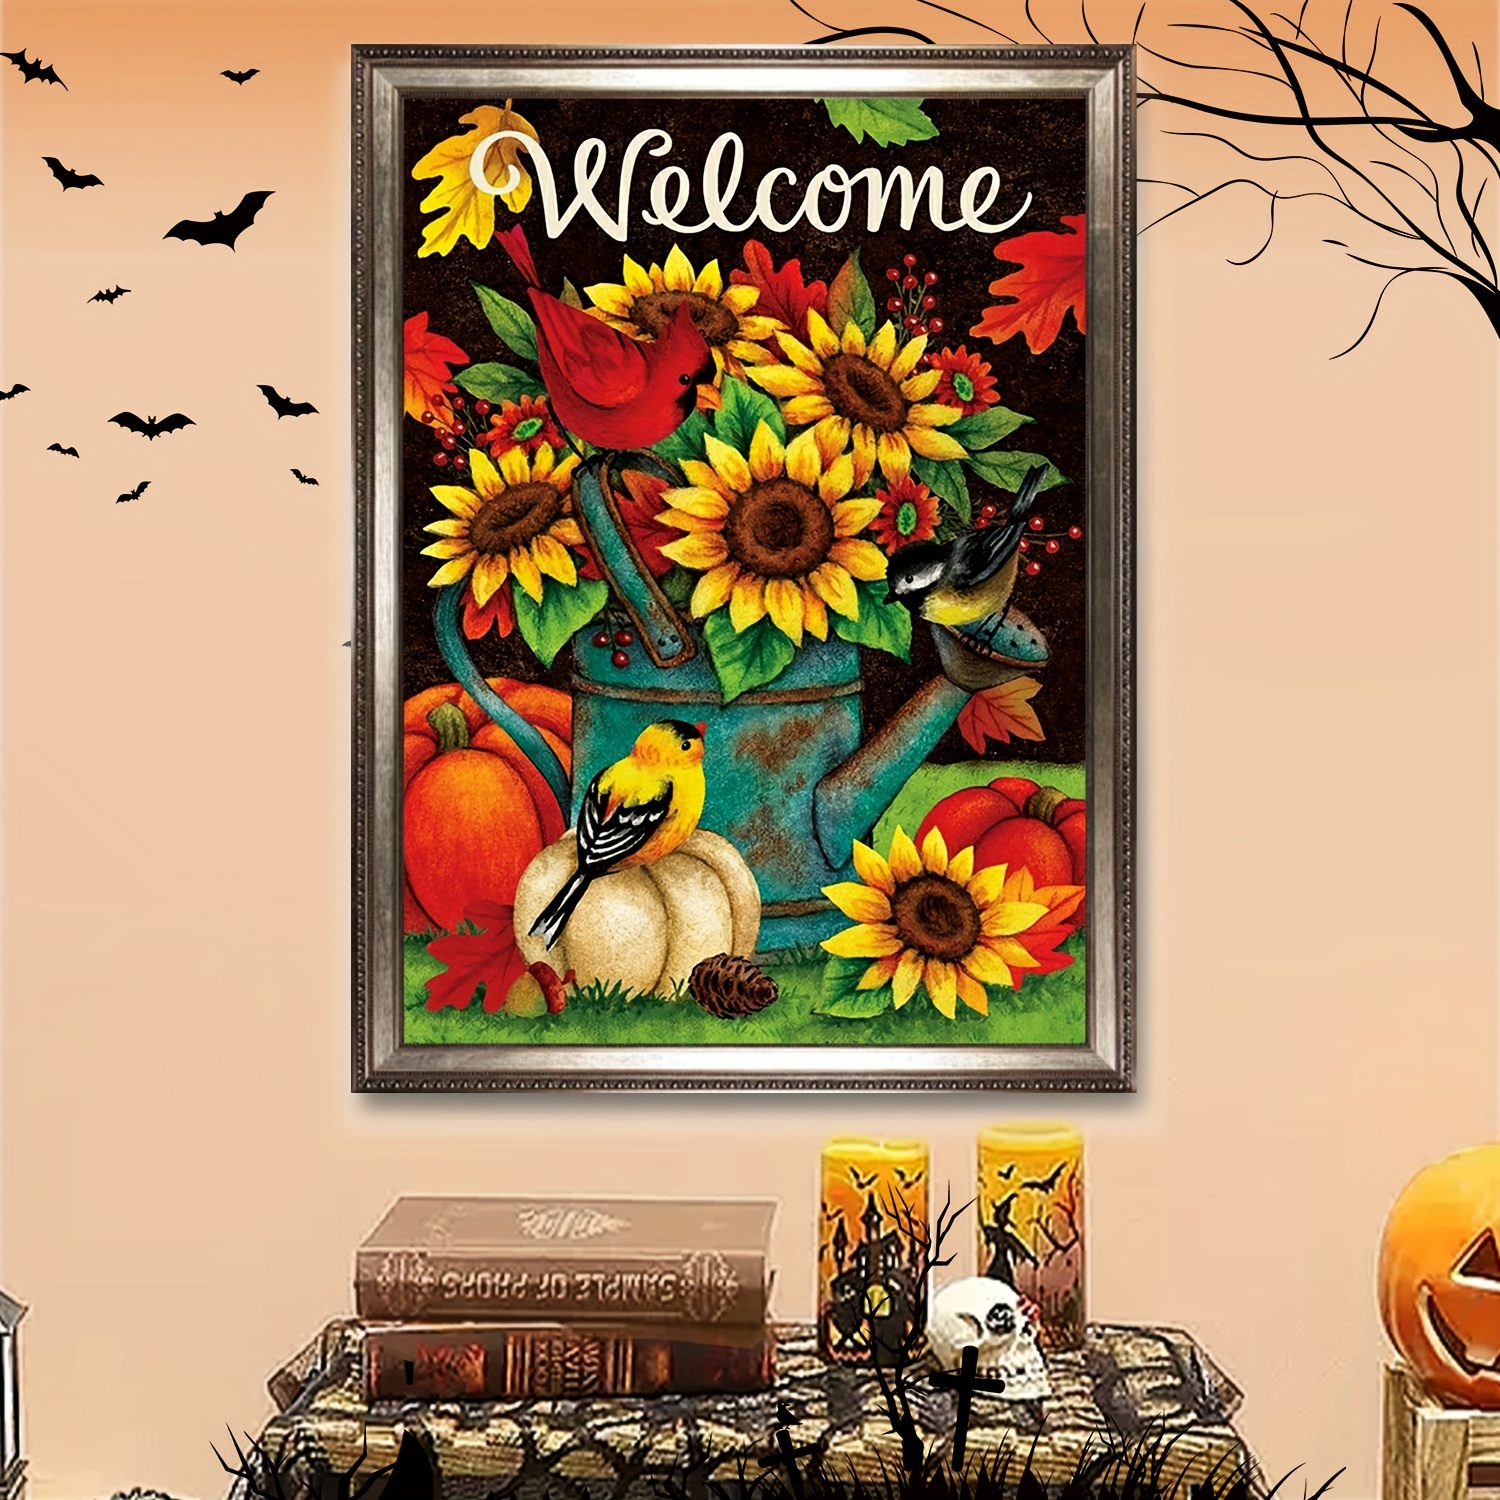  Diamond Painting Kits - 5D Autumn Pumpkin Sunflower Diamond Art  for Adults Kids Full Drill Round Crystal Pictures Home Wall Art (12 X 16)